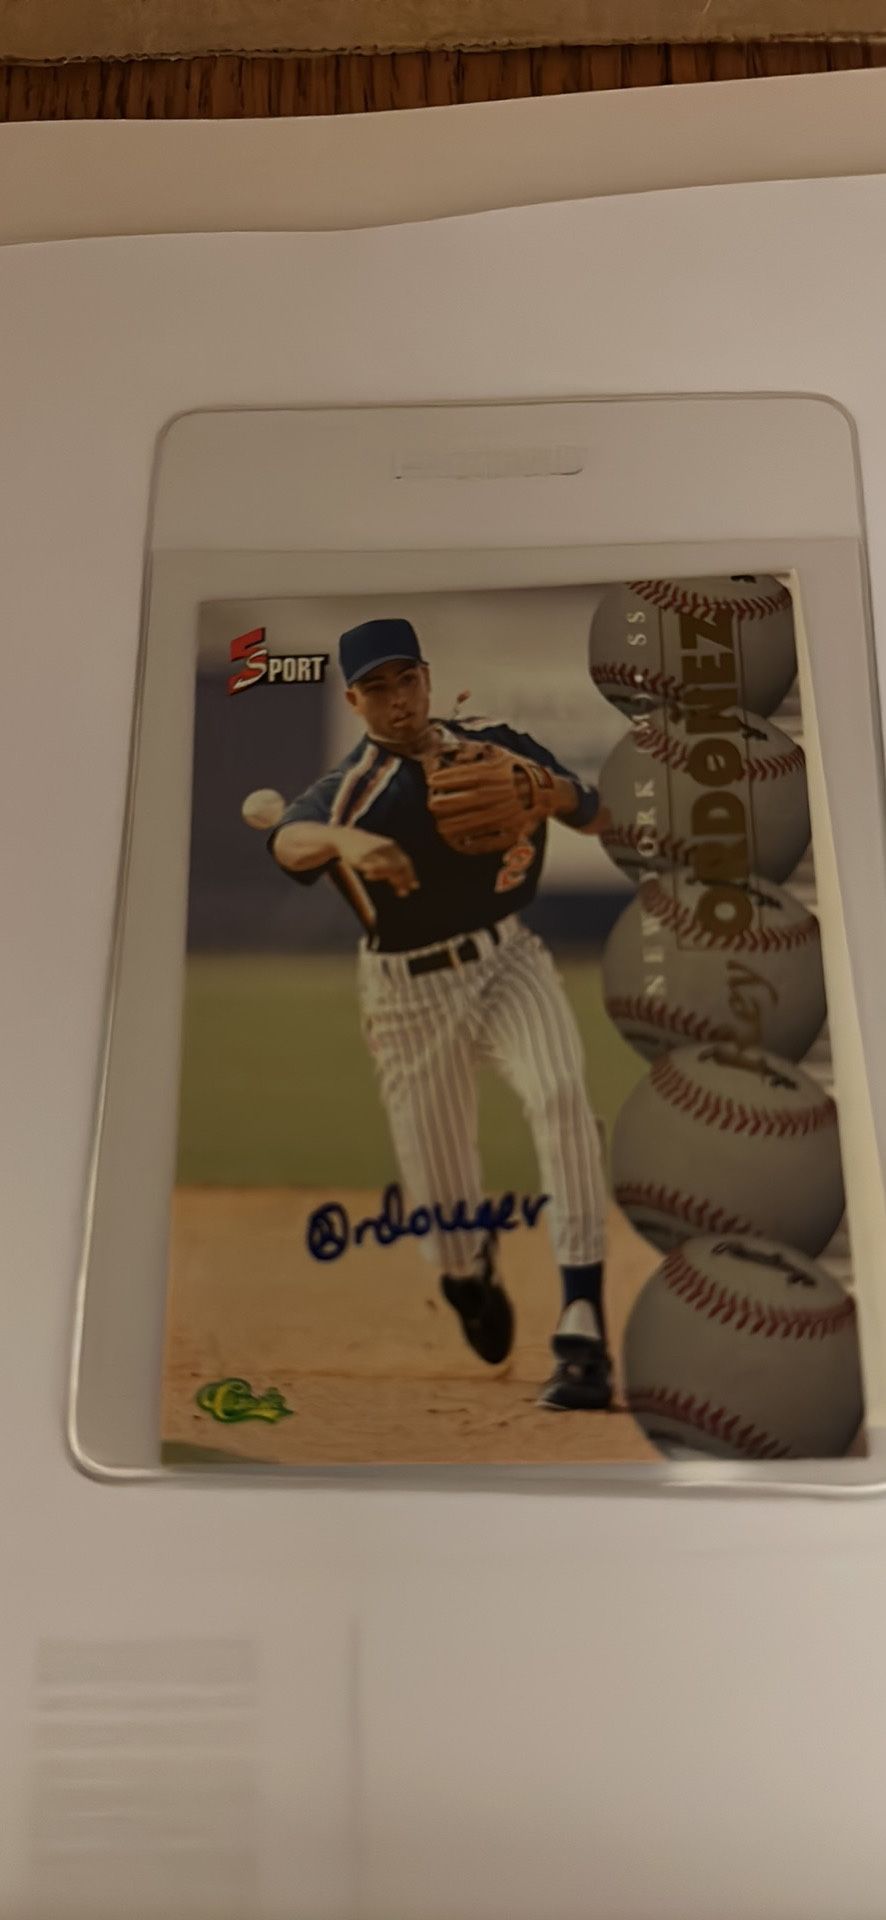 1995 Classic 5 Sport Insert Baseball Card Autograph Signed Ray Ordonez Mets